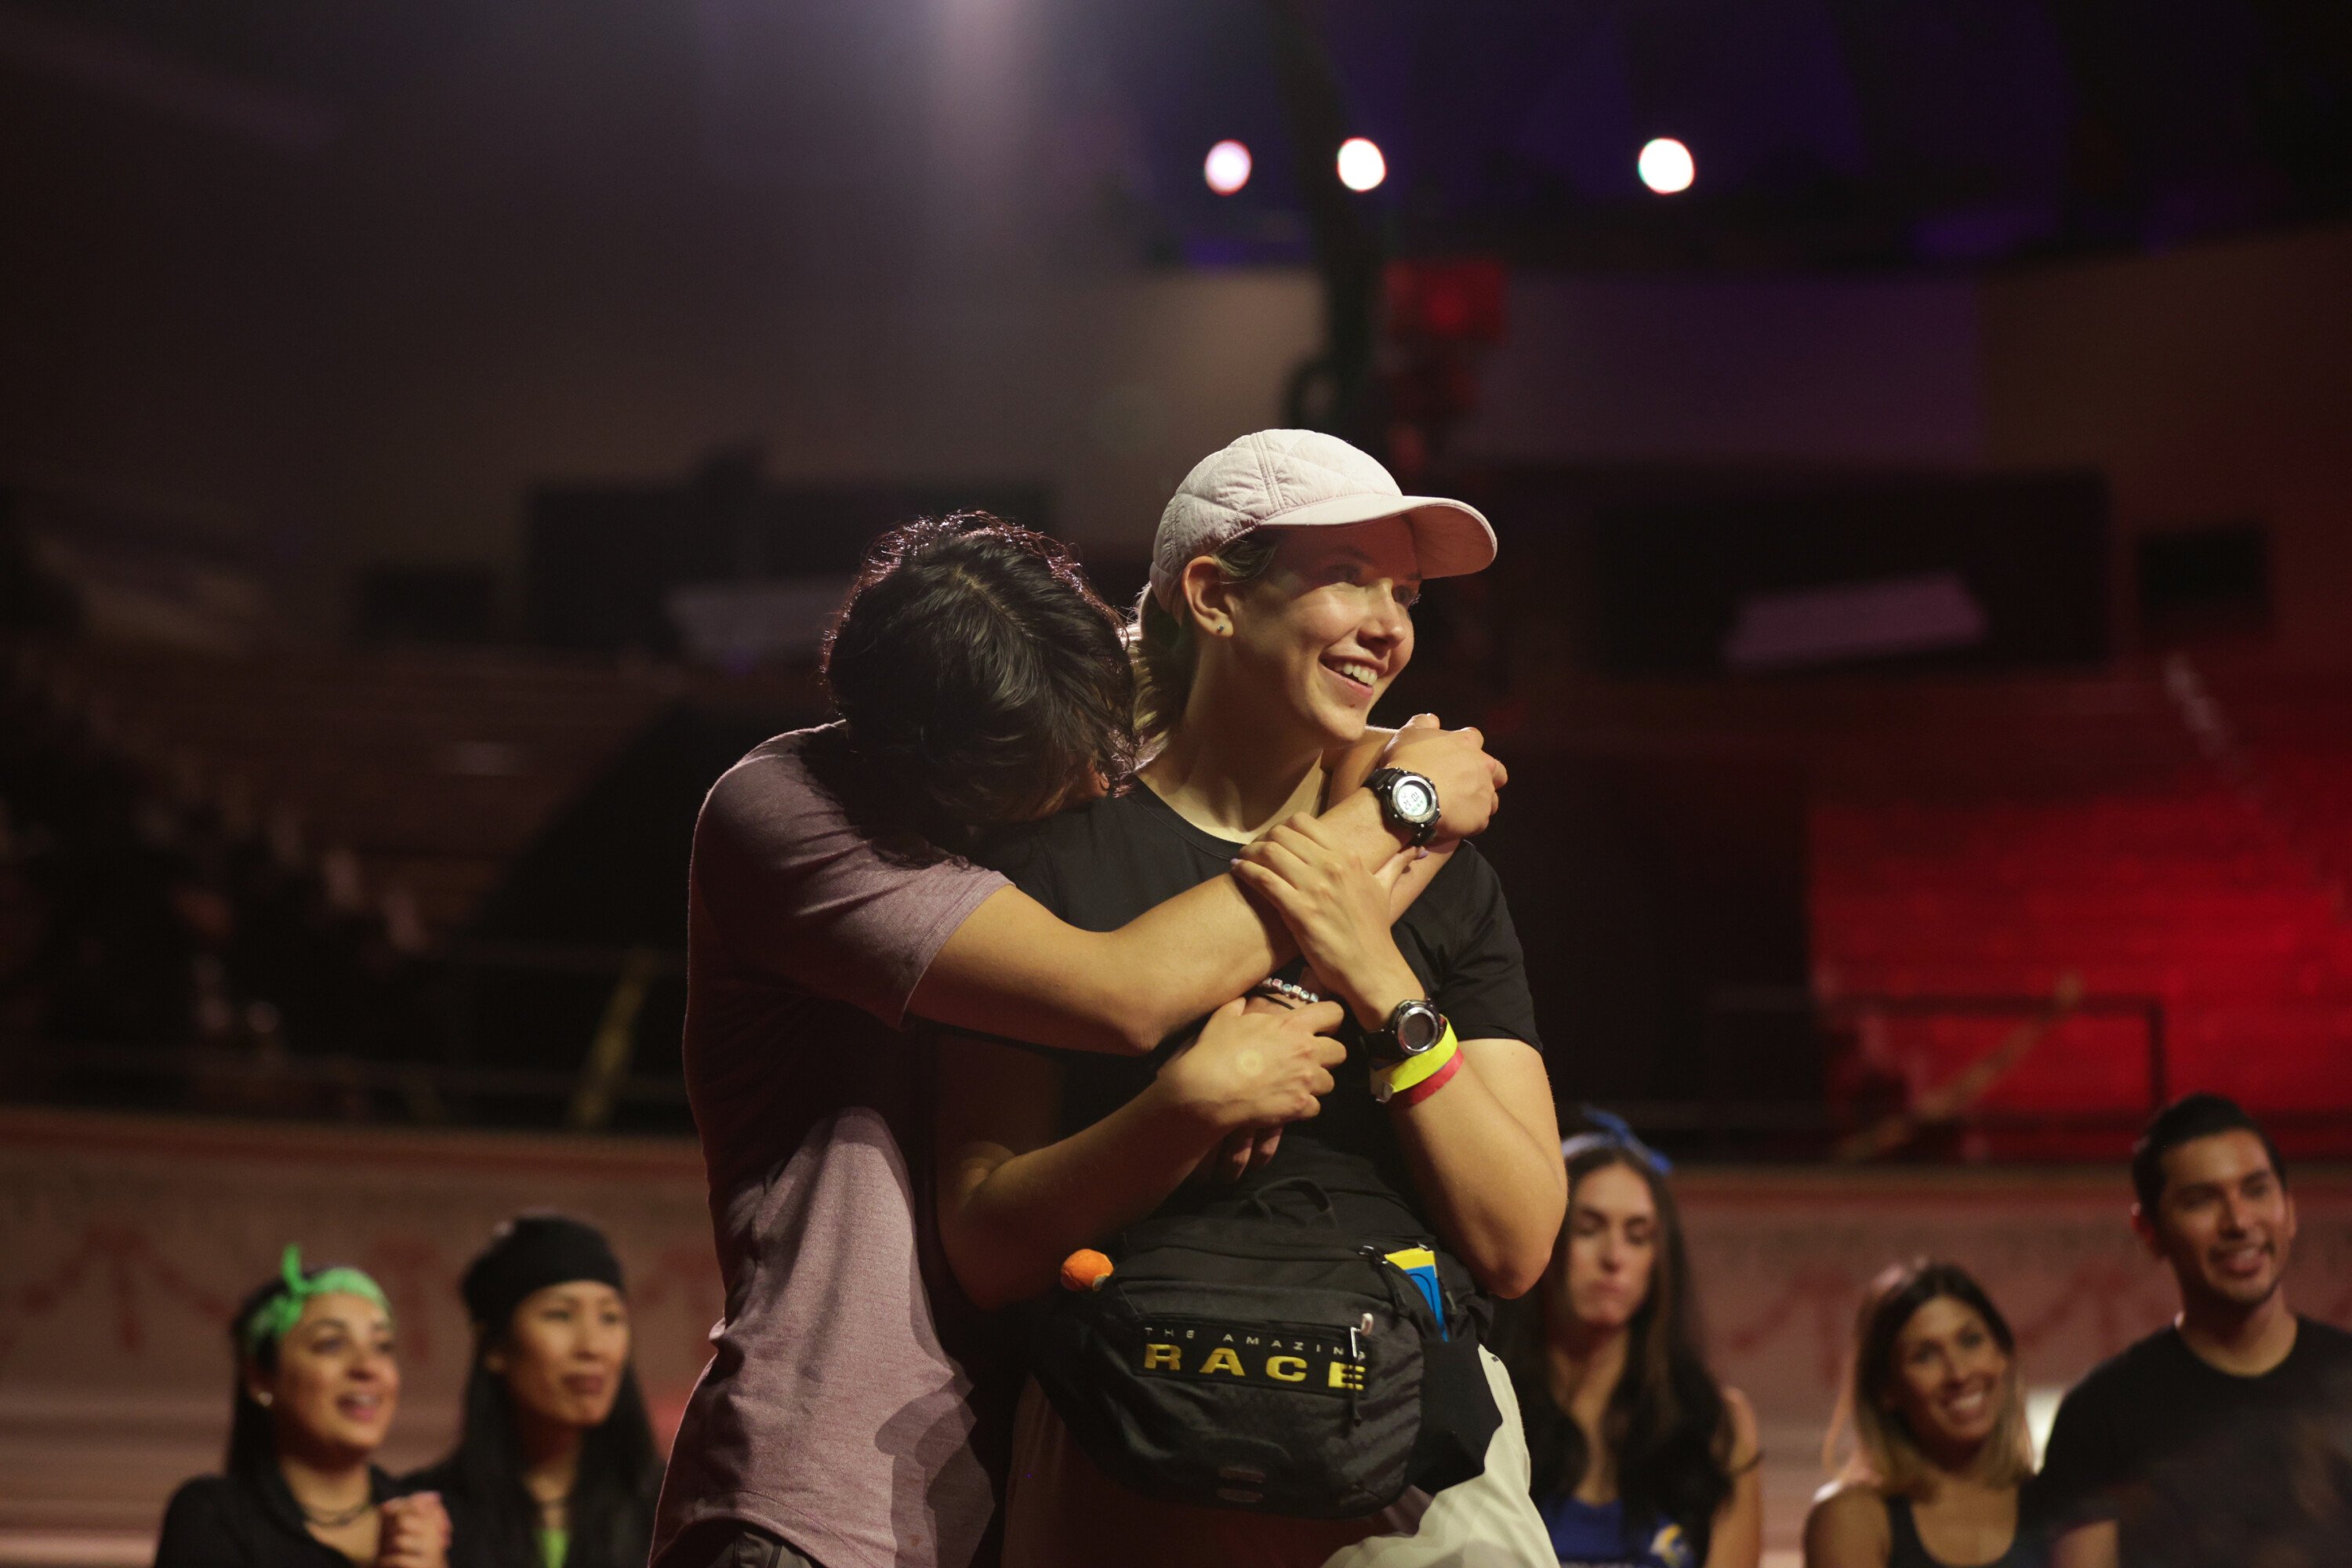 Derek Xiao and Claire Rehfuss, who starred in 'The Amazing Race' Season 34 on CBS, embrace at the finish line. Derek wears a light purple shirt. Claire wears a black shirt and light pink baseball hat.